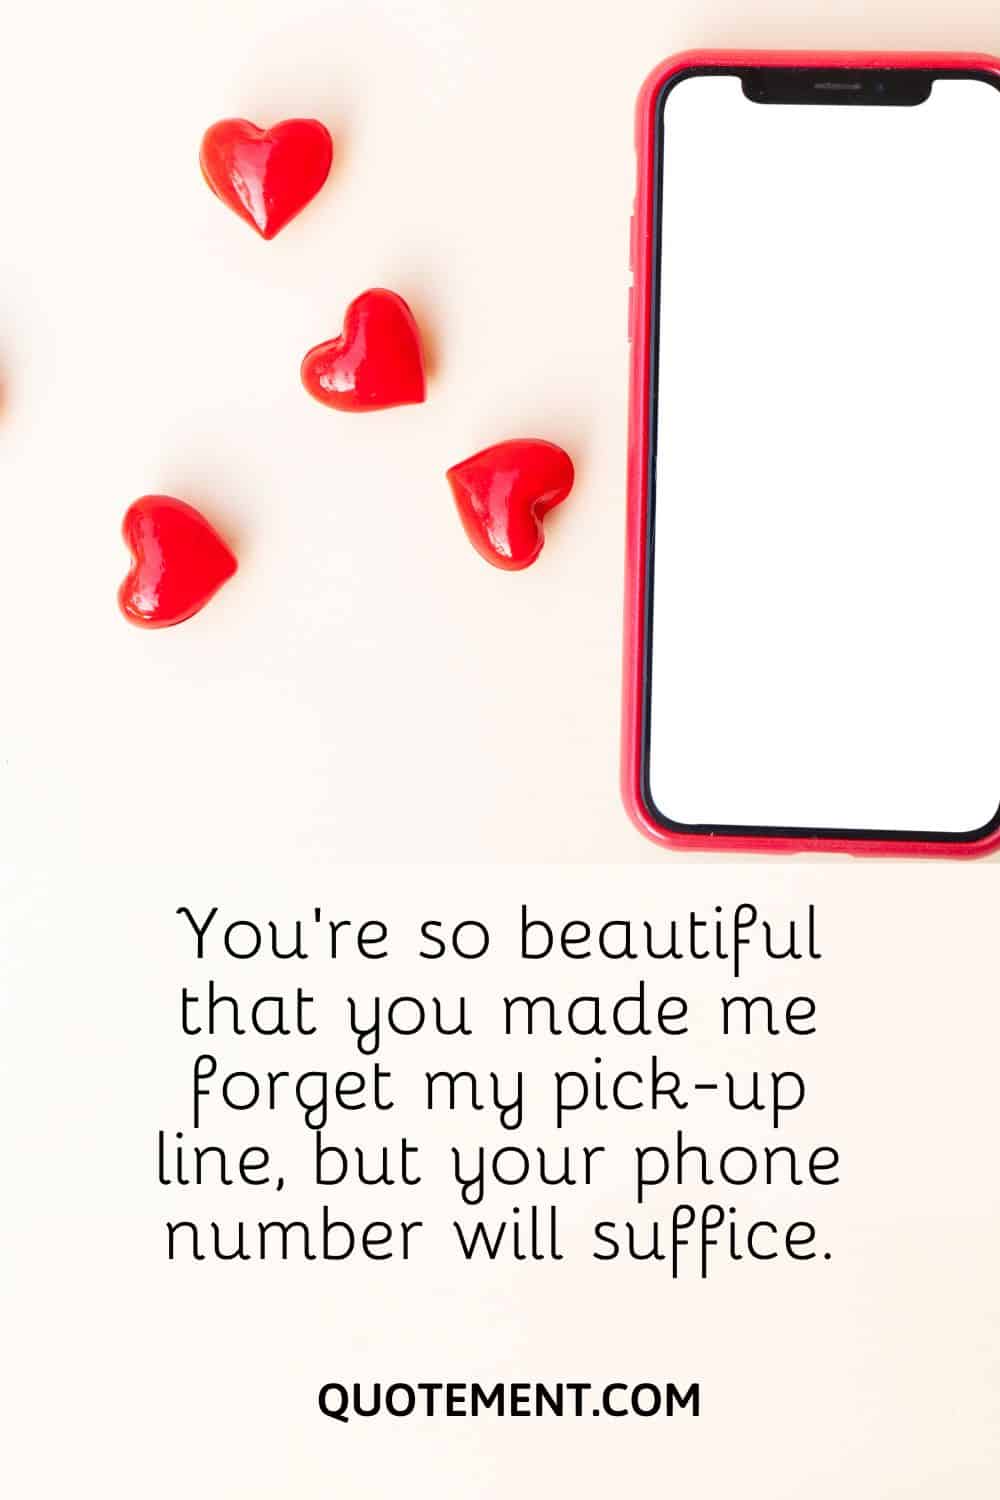 You’re so beautiful that you made me forget my pick-up line